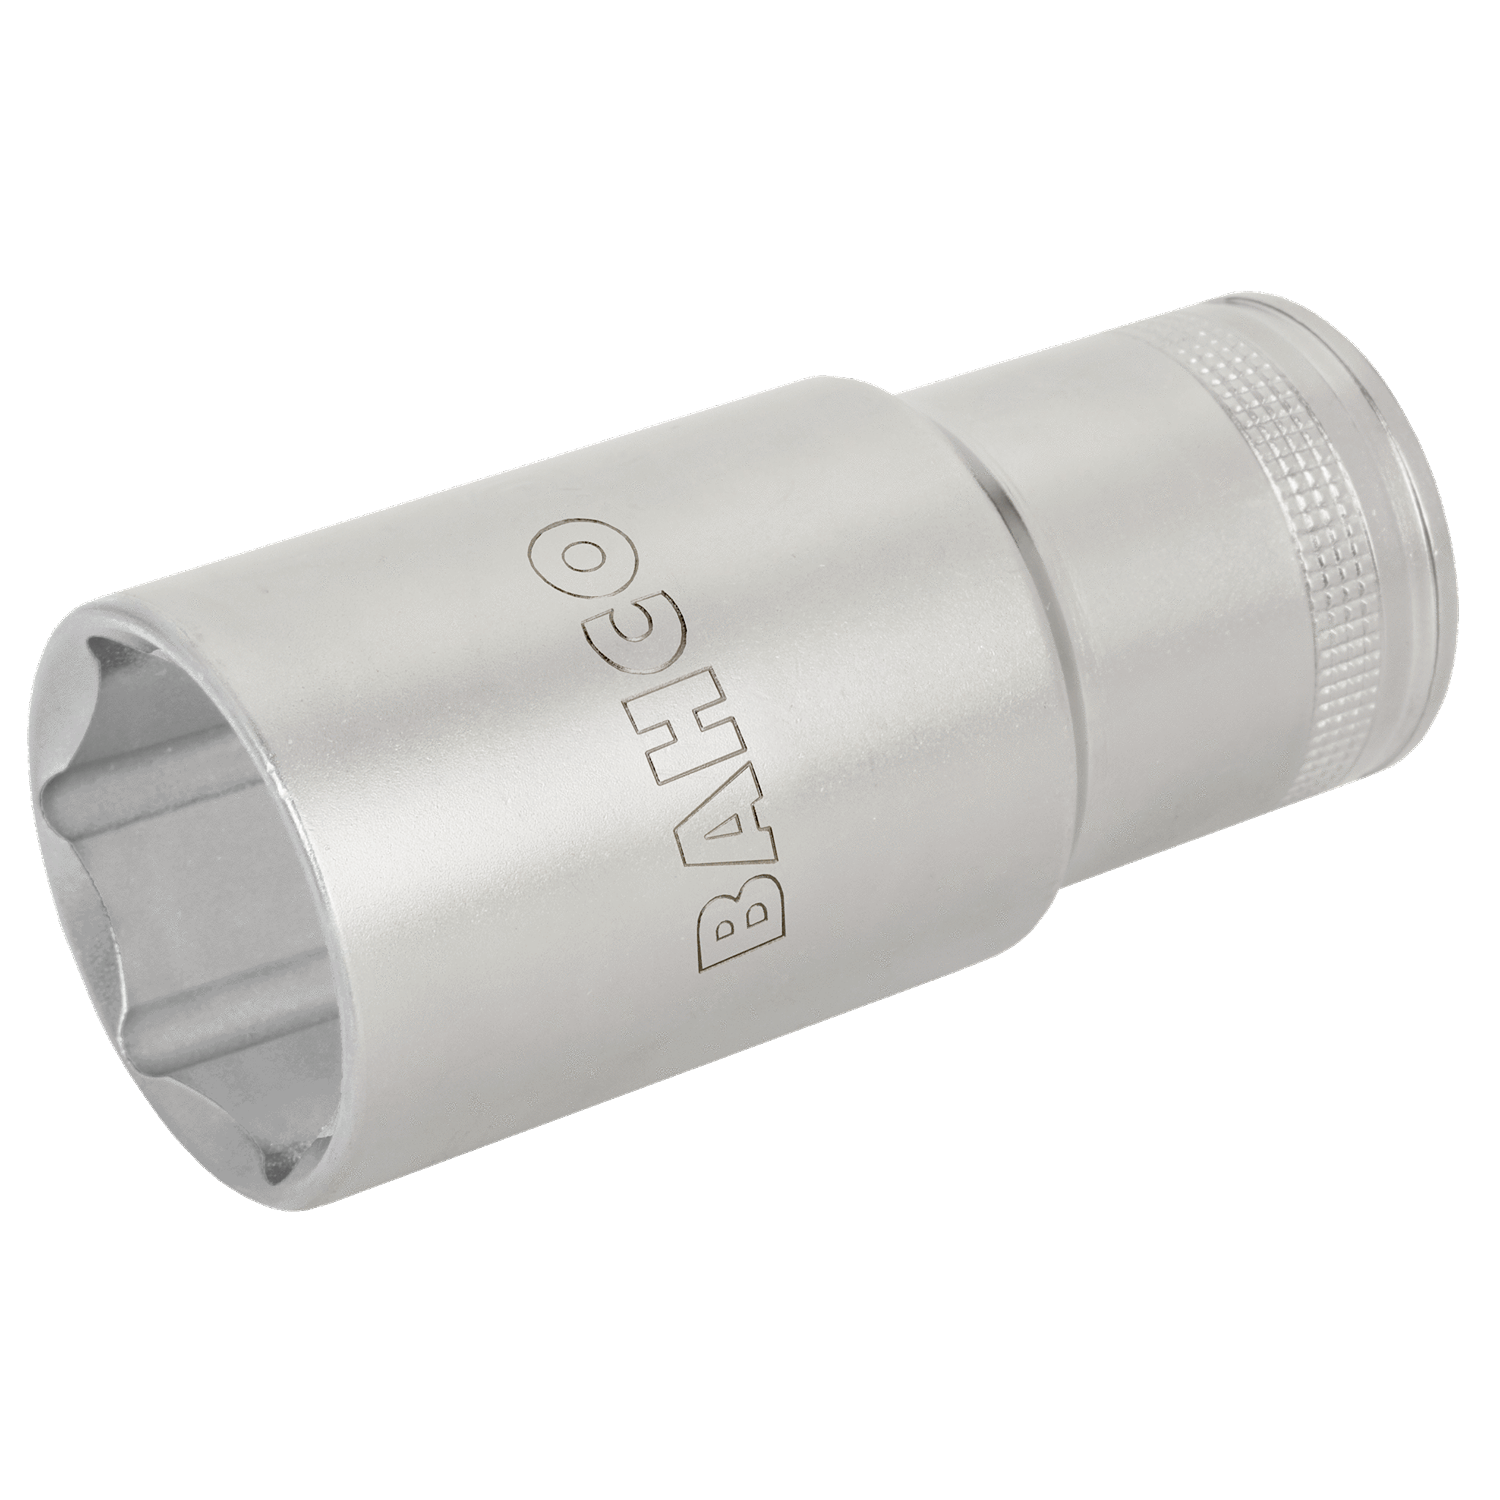 BAHCO 7400SM 1/2" Square Drive Deep Socket Metric Hex Profile - Premium Deep Socket from BAHCO - Shop now at Yew Aik.